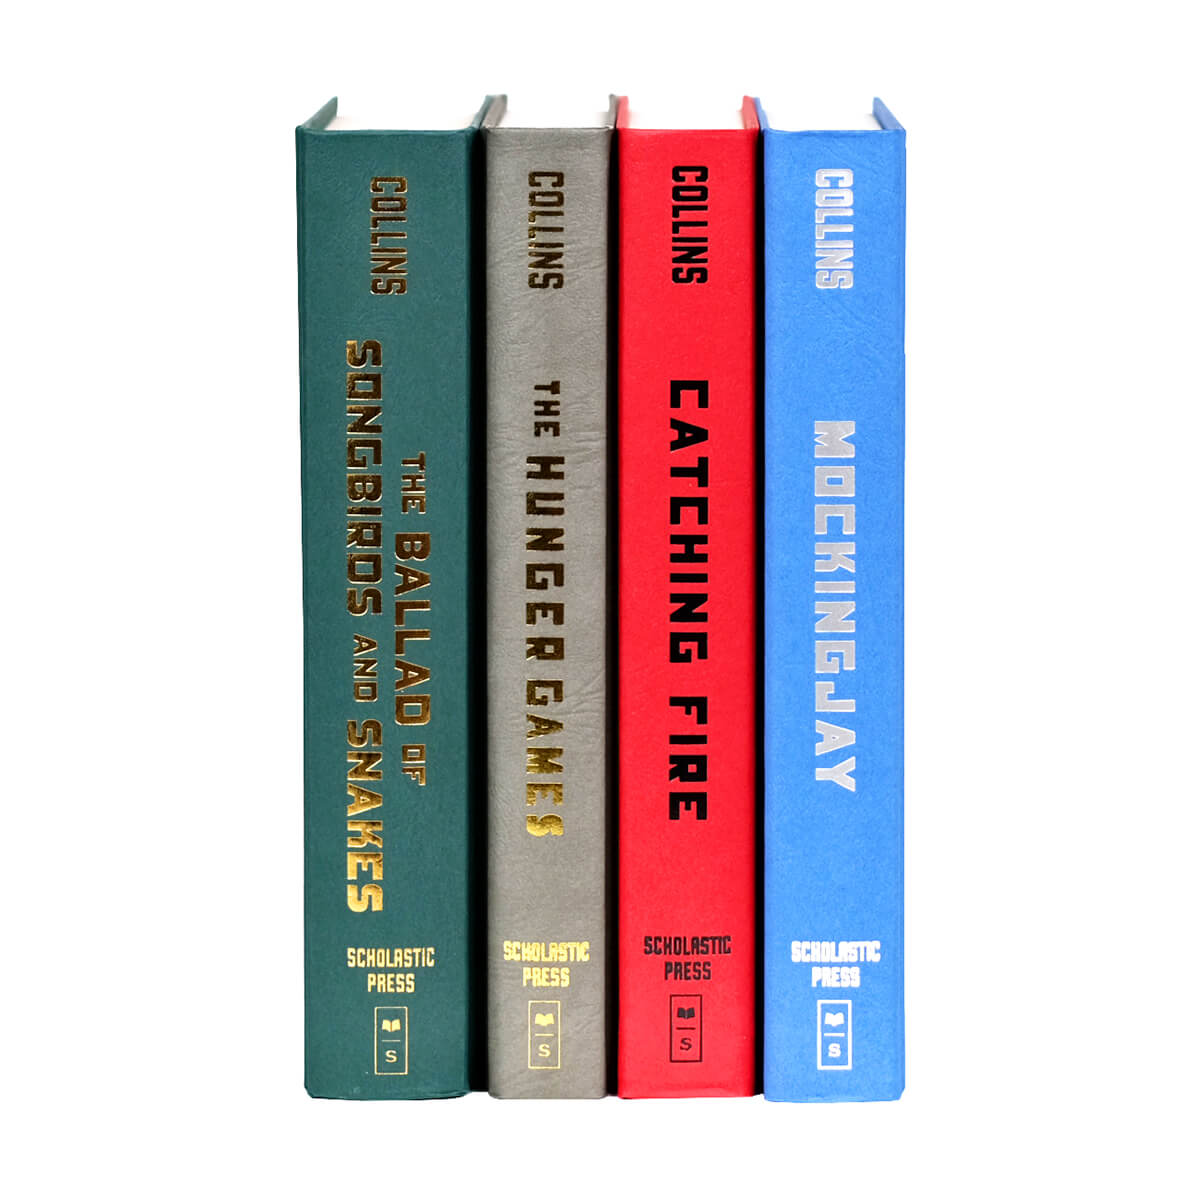 Hunger Games Series by Suzanne Collins shown here without Juniper Custom book jackets